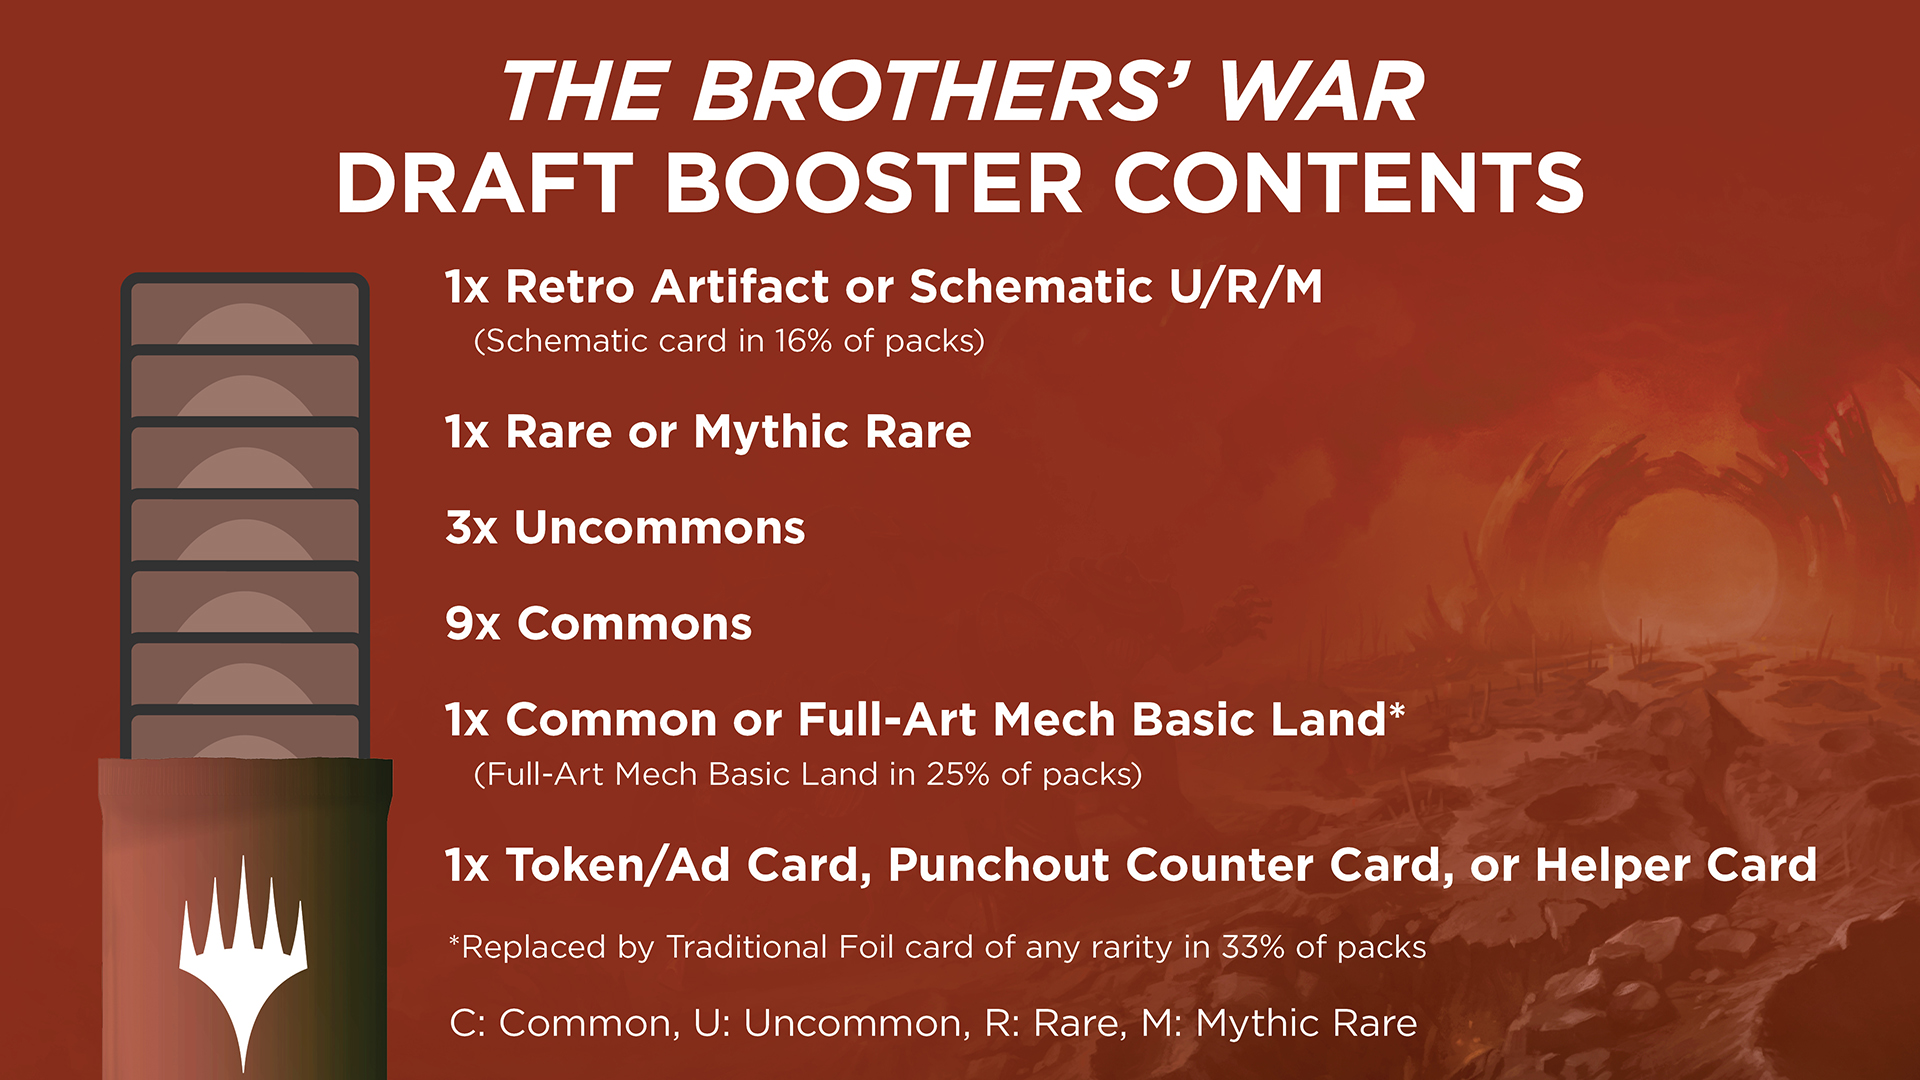 The Brothers' War Draft Booster Collation Infographic